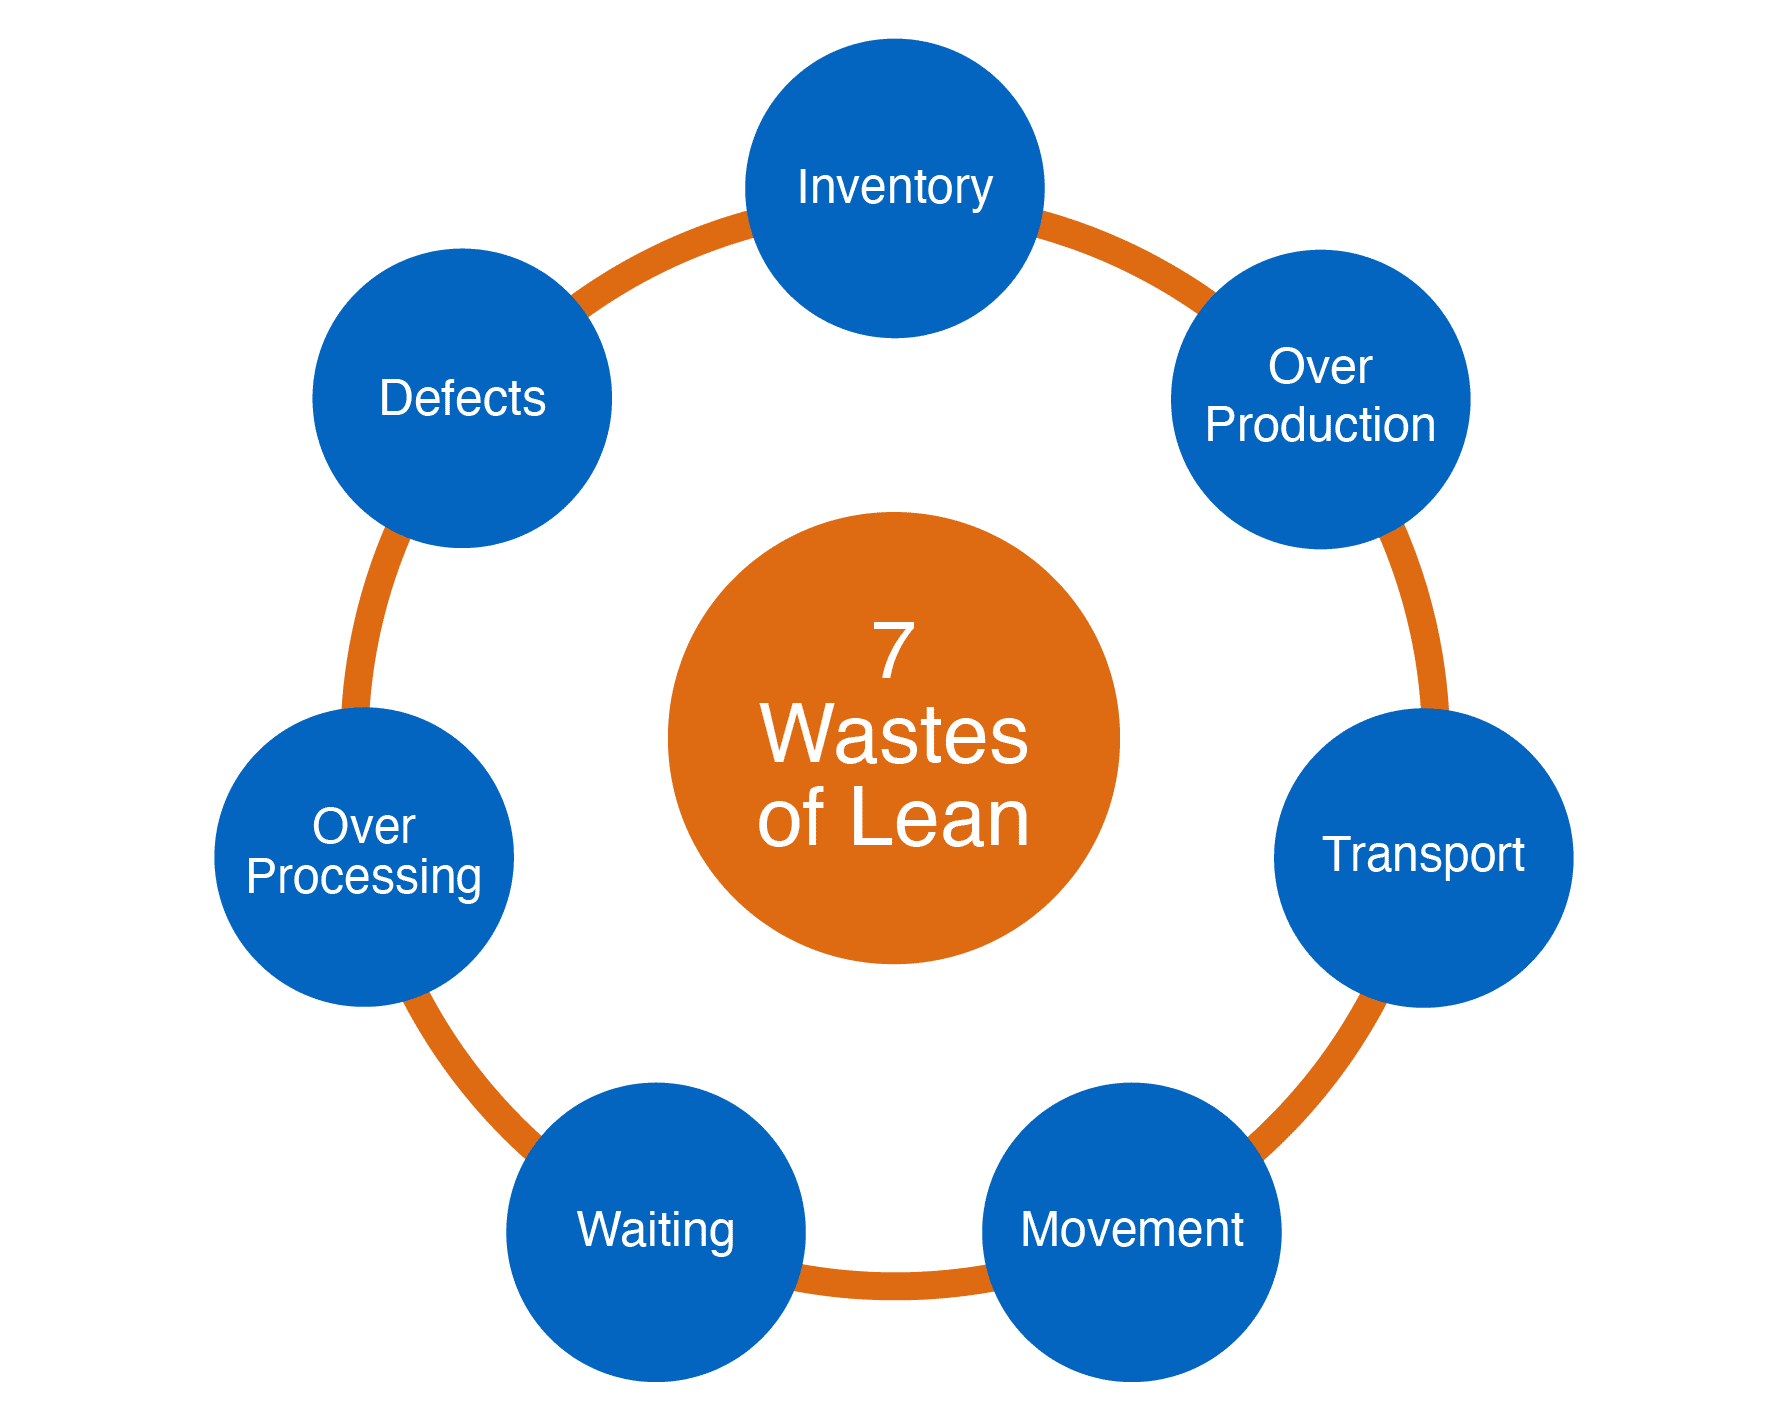 7-Wastes-of-Lean-min.png